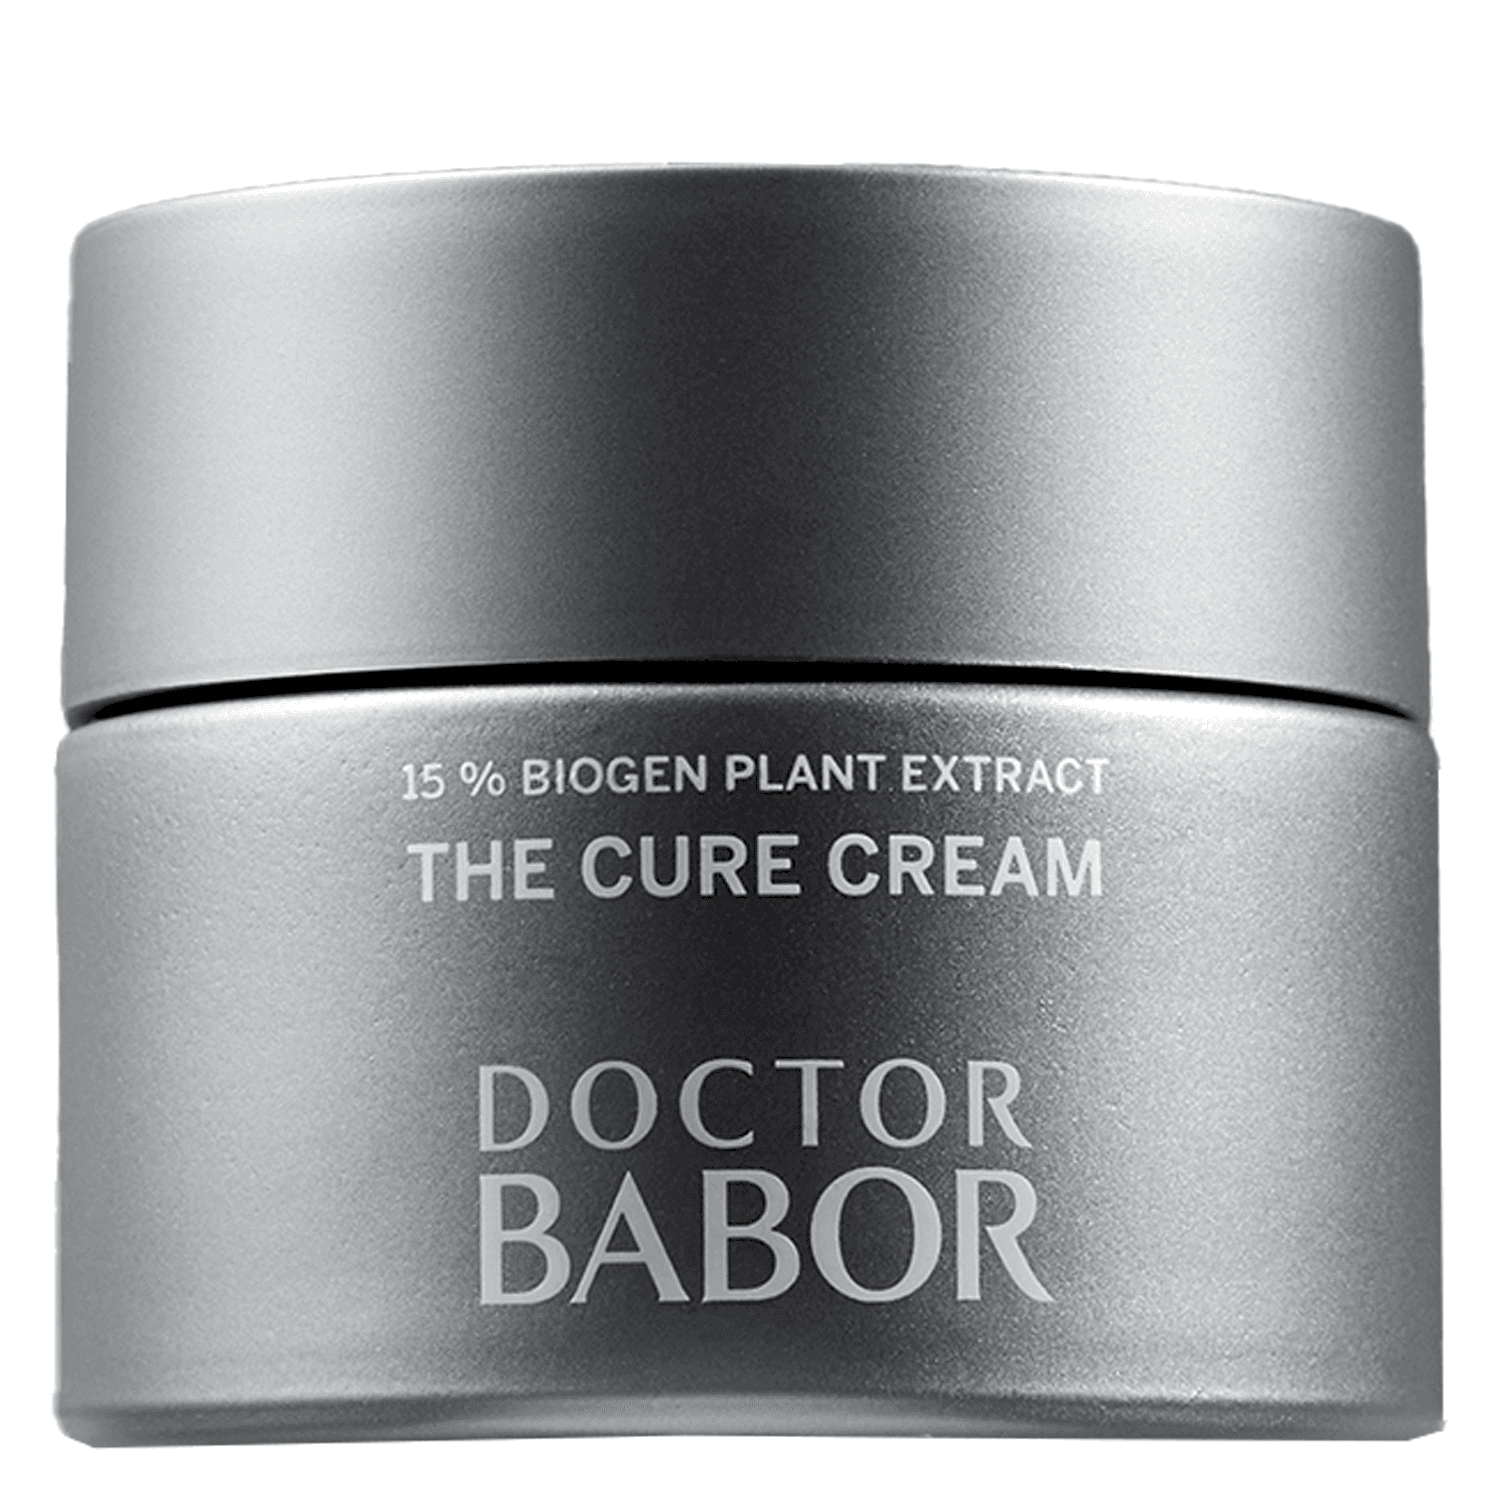 DOCTOR BABOR - The Cure Cream